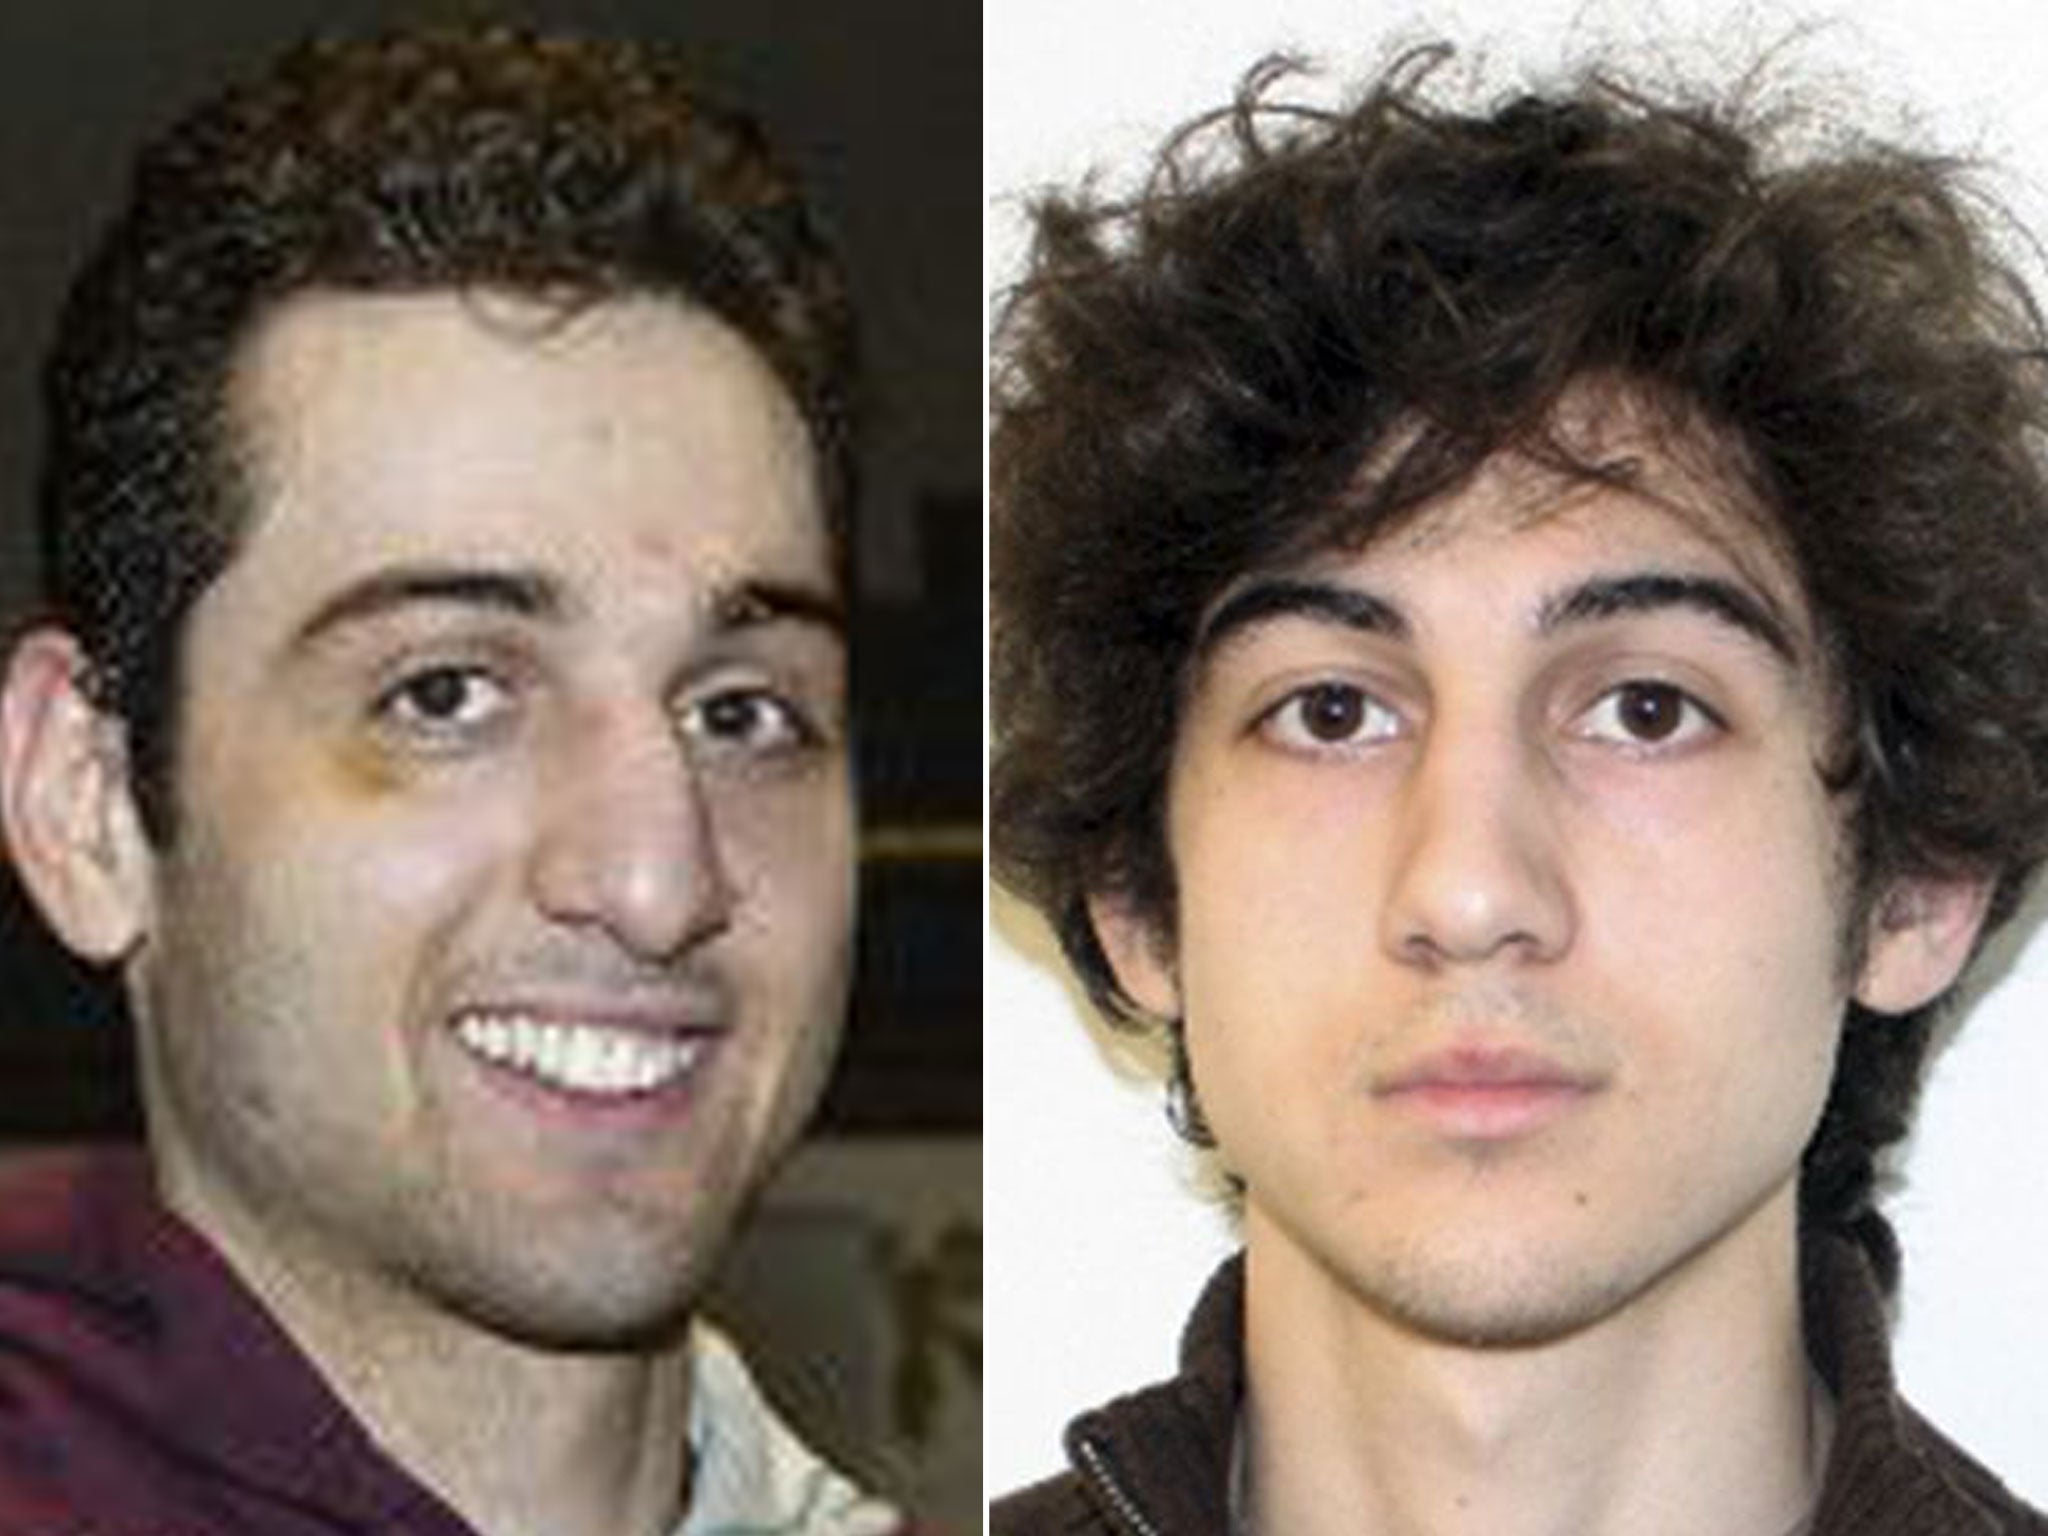 Boston brothers Tamerlan and Dzhokhar Tsarnaev had planned 4 July attack, says official The Independent The Independent photo